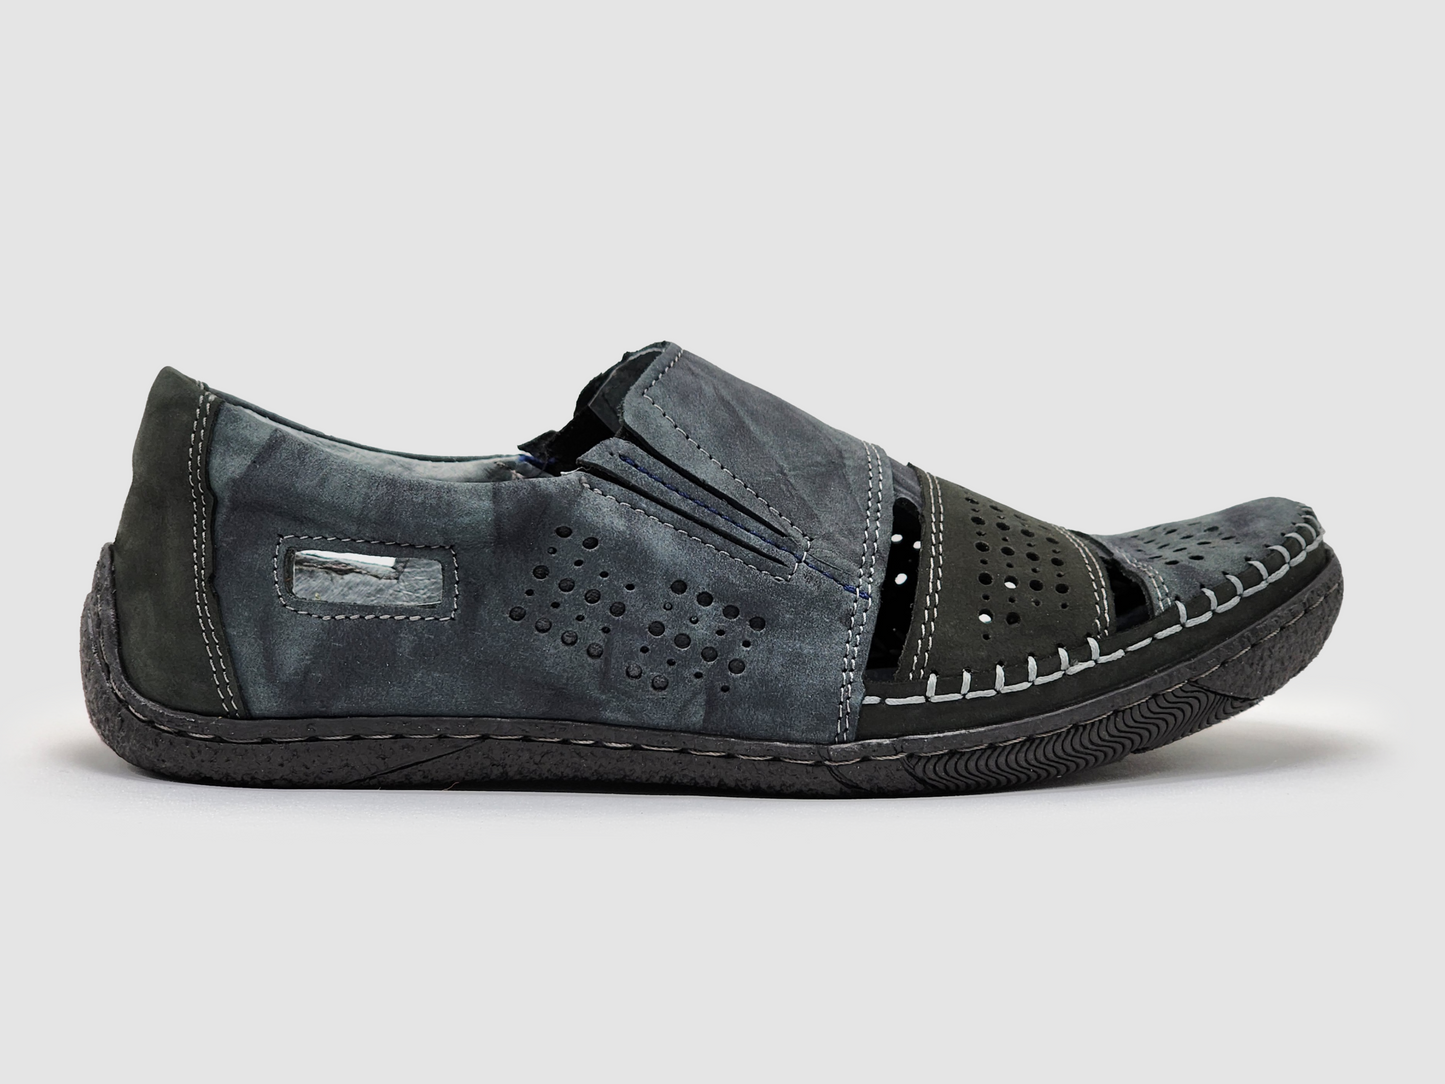 Men's Vacation Leather Sandals - Navy - Kacper Global Shoes 